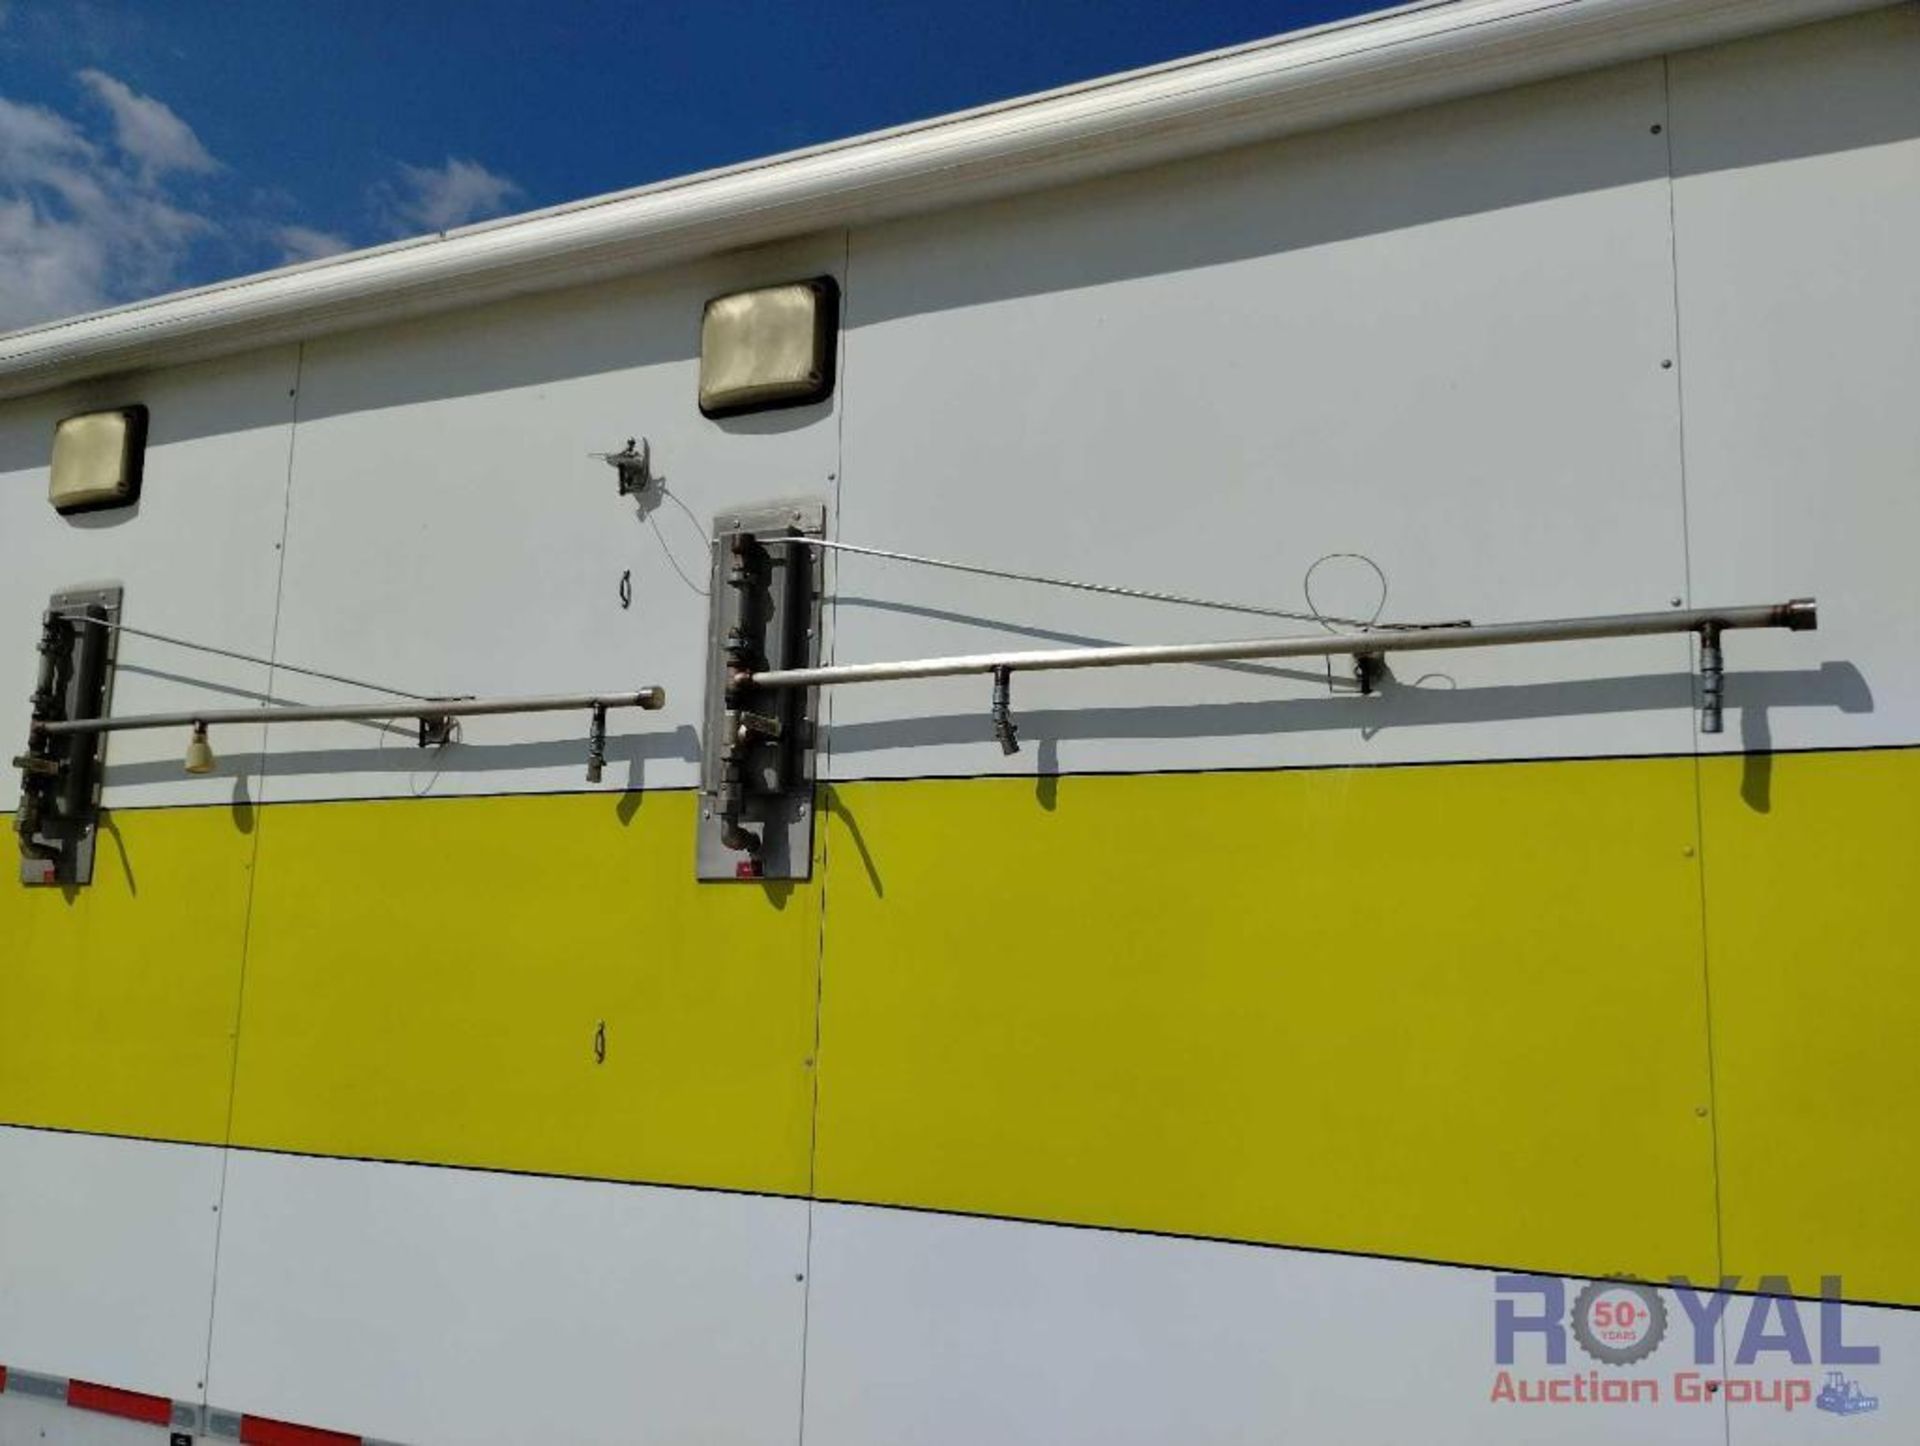 Fire/Rescue Portable Bathroom and Shower Trailer - Image 14 of 50